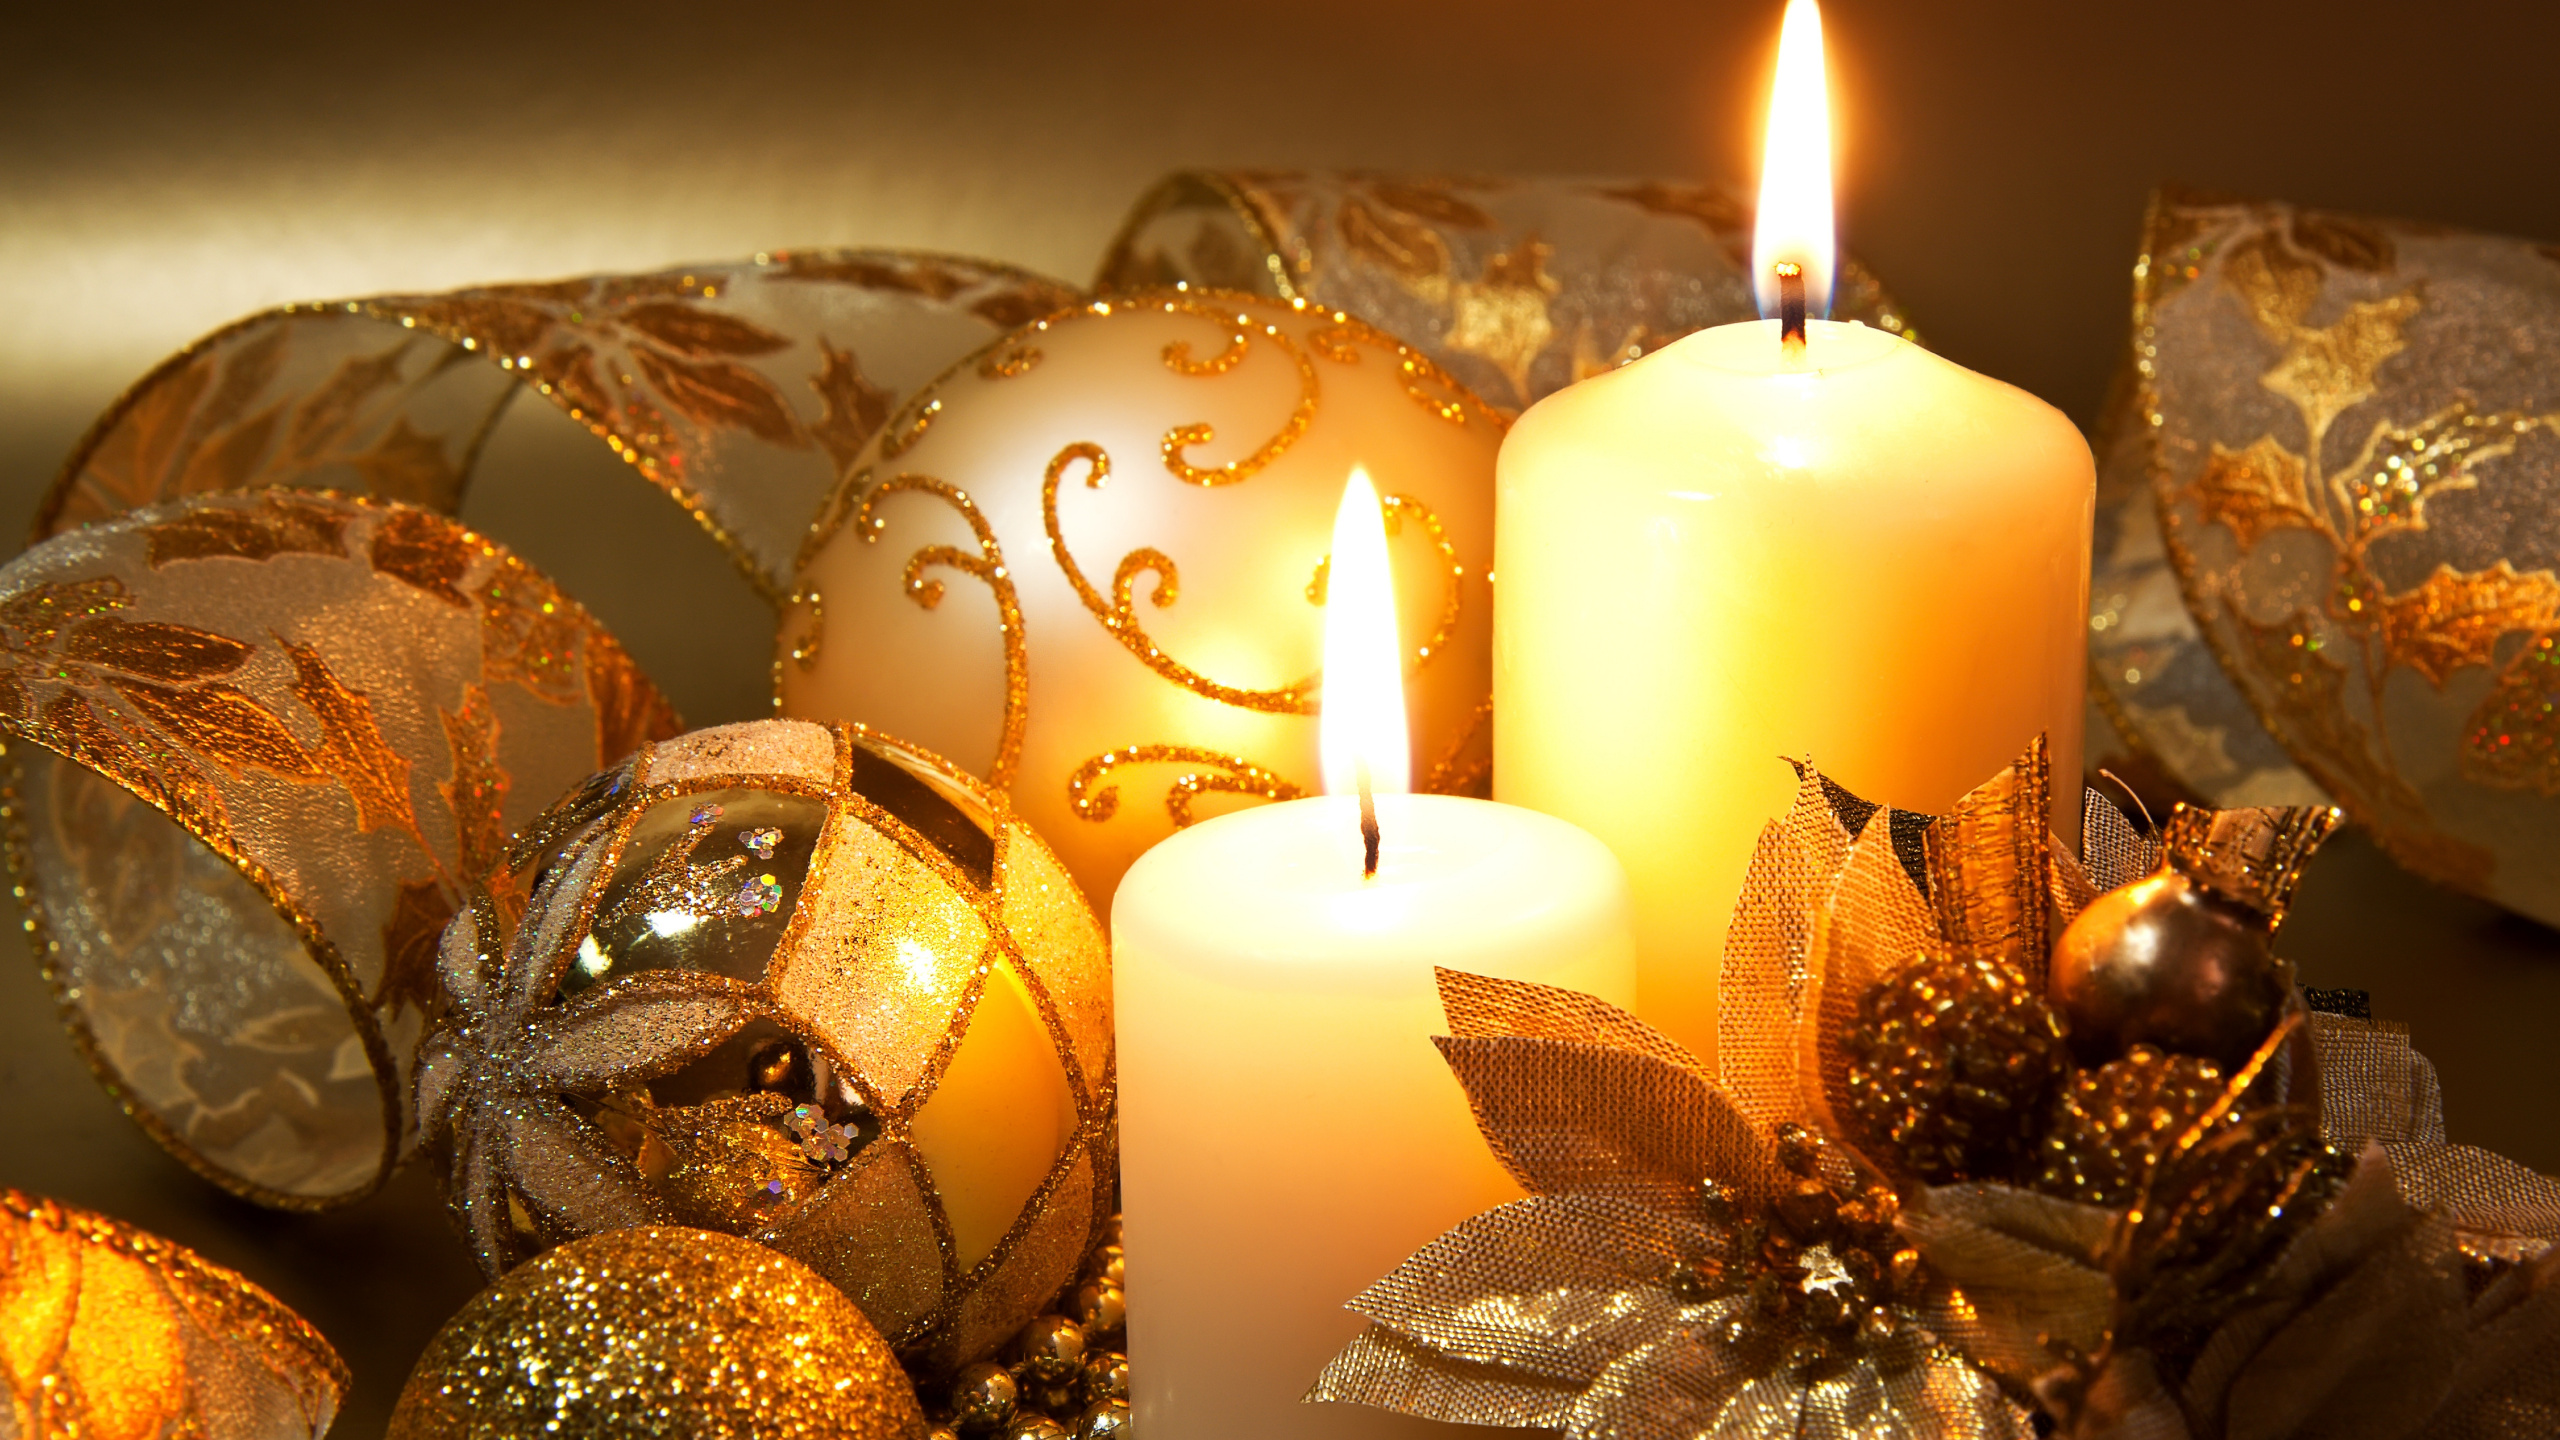 Christmas Decoration, Christmas Day, Christmas Ornament, Candle, Still Life. Wallpaper in 2560x1440 Resolution